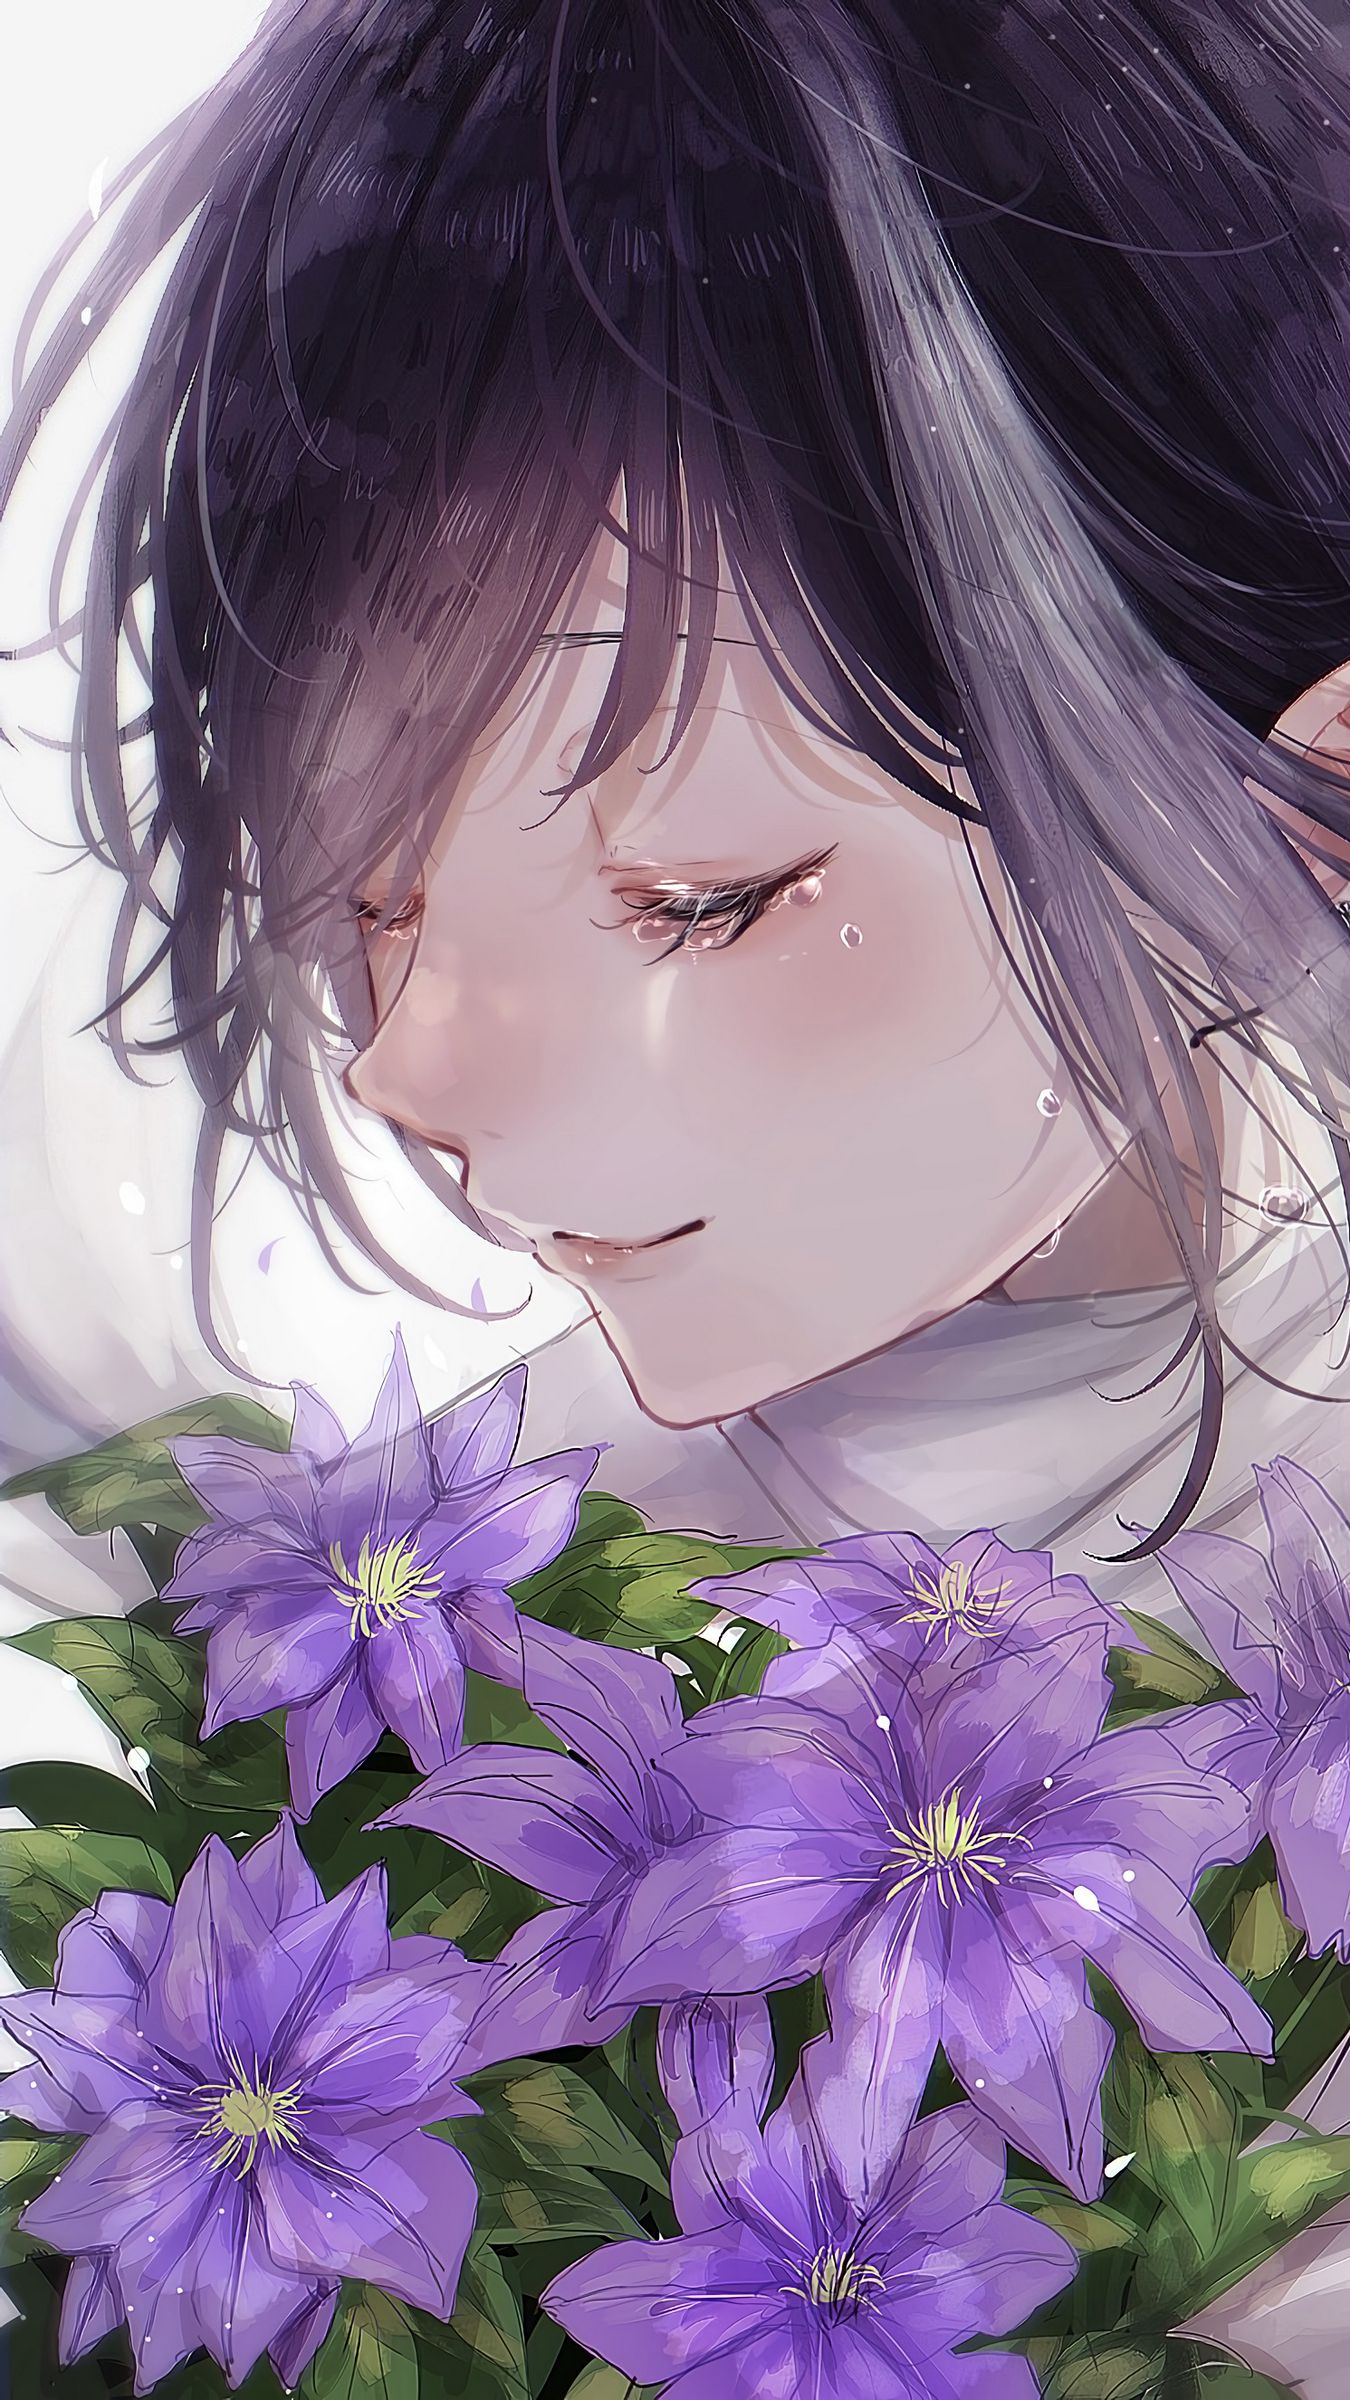 Download wallpaper 1350x2400 girl, flowers, tears, sad, anime, art iphone  8+/7+/6s+/6+ for parallax hd background